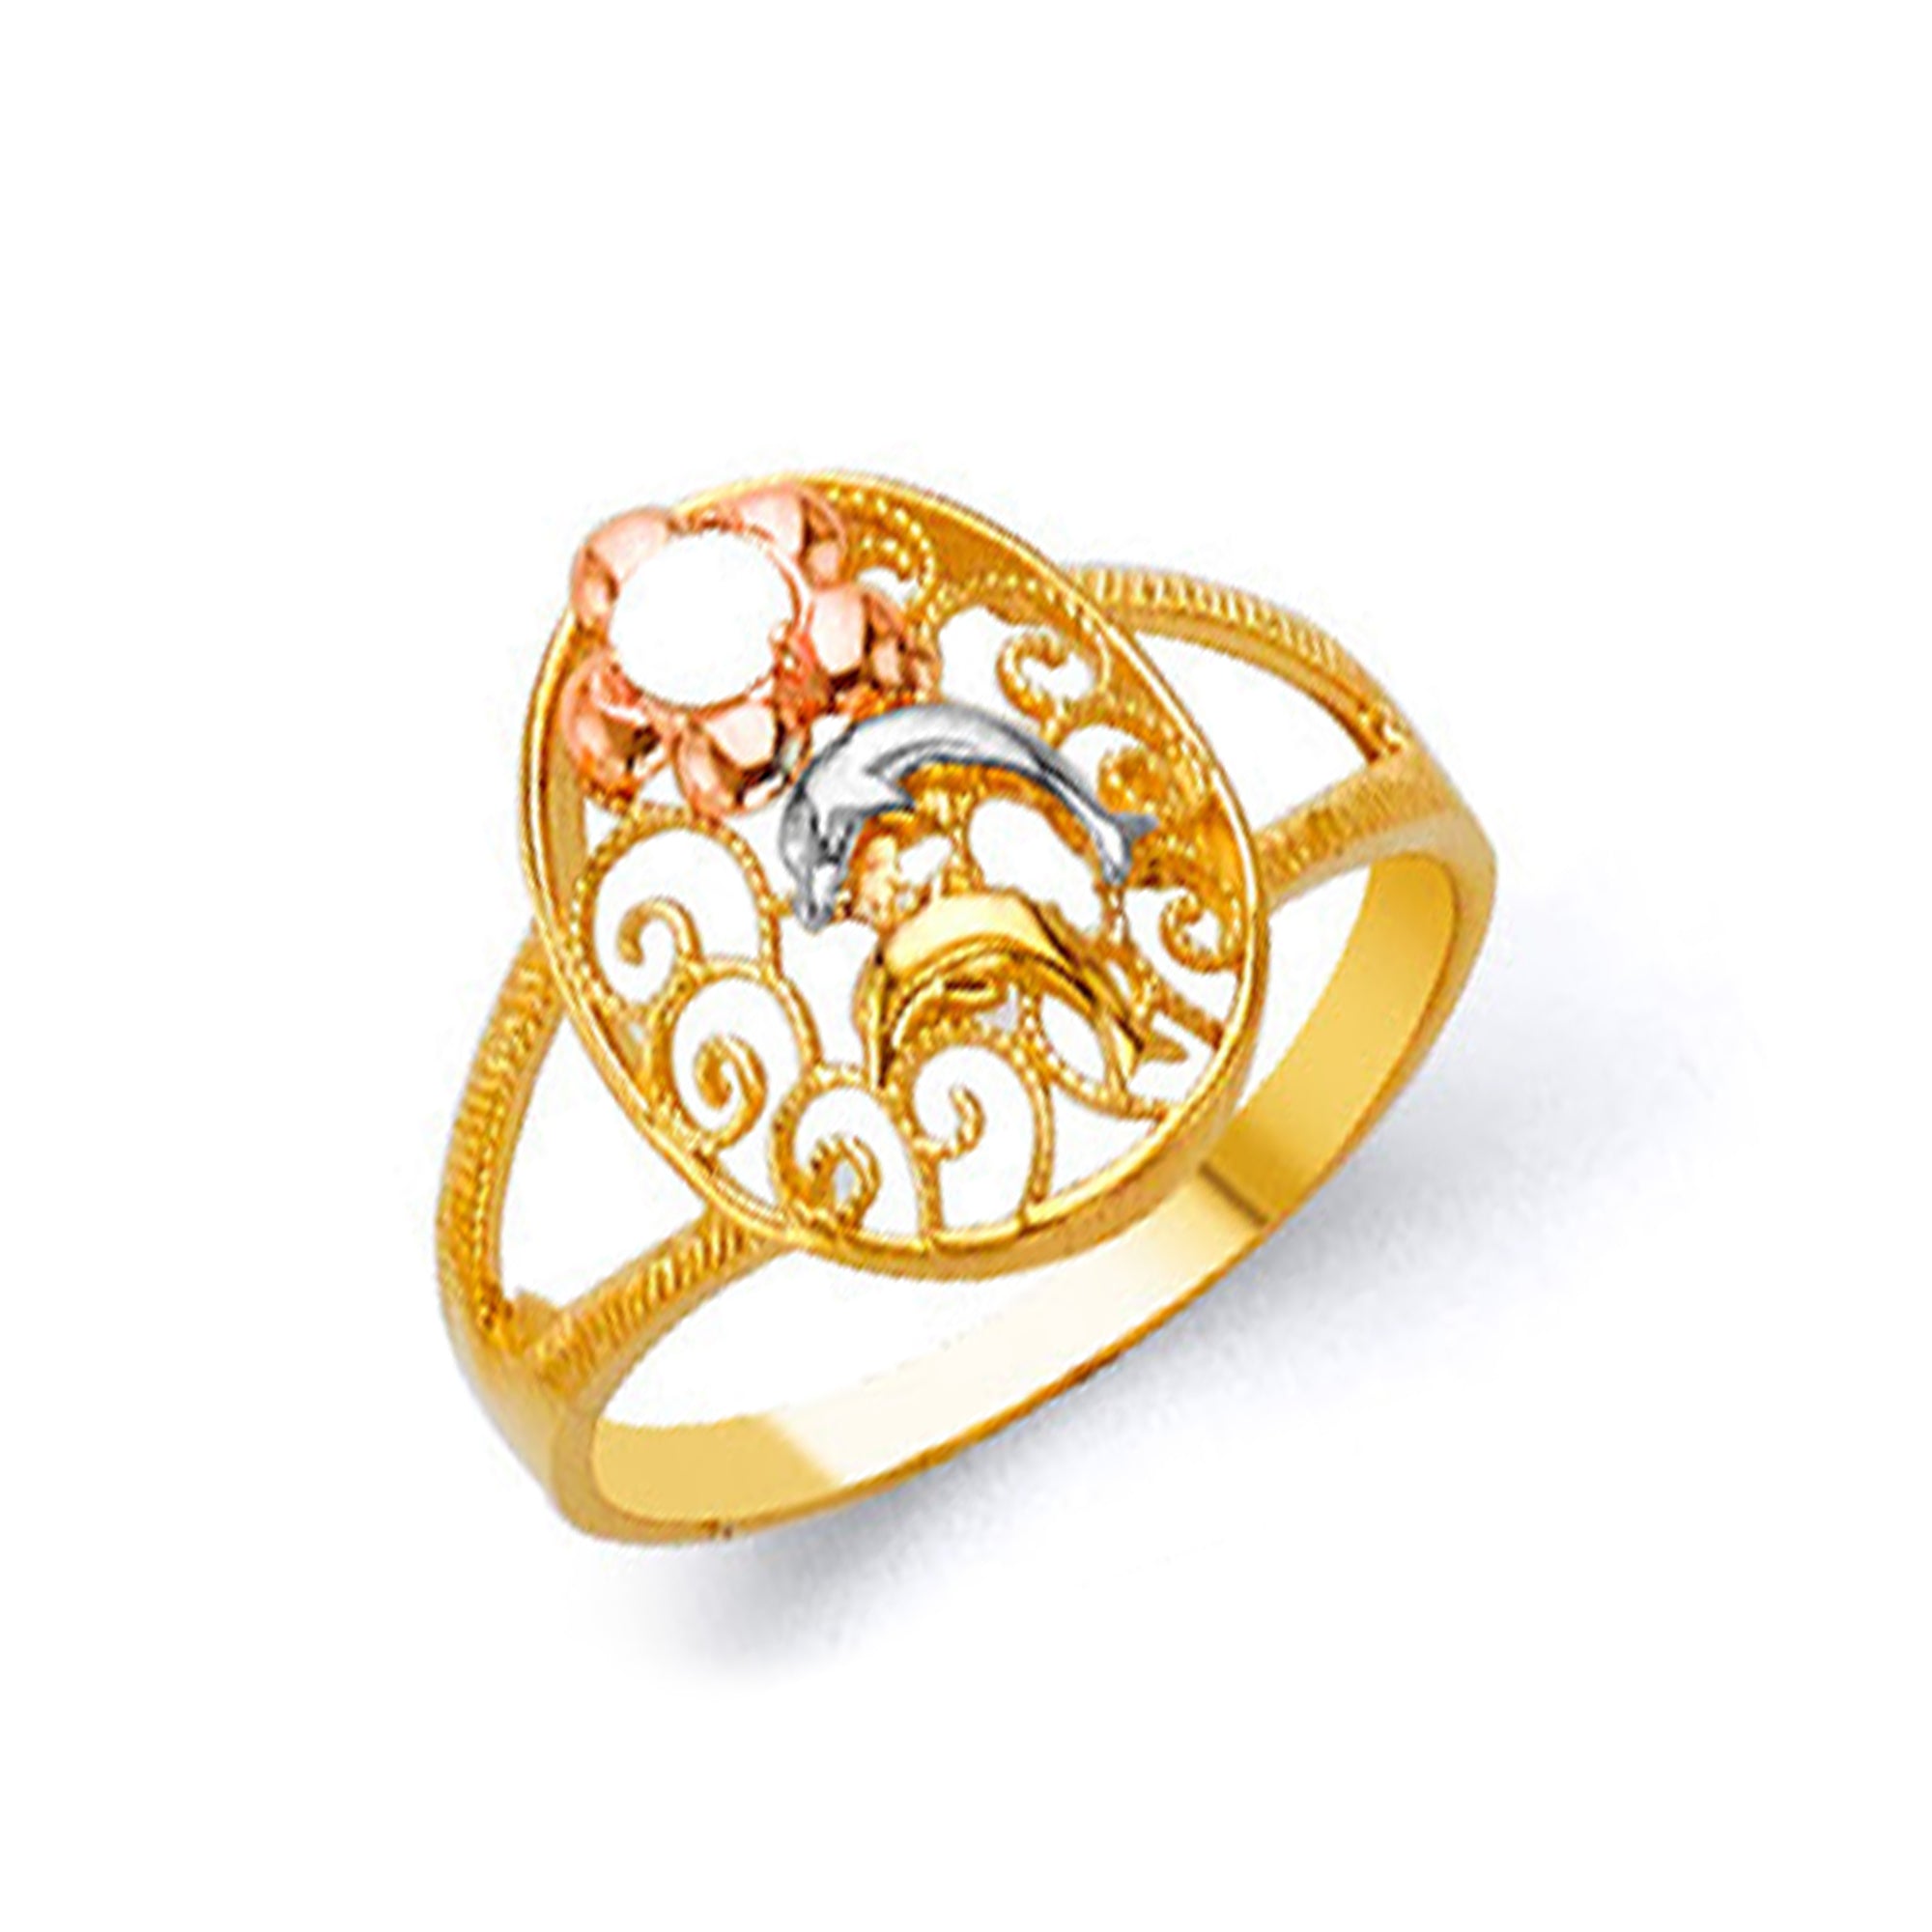 Hollow Patterned Ring in Solid Gold 